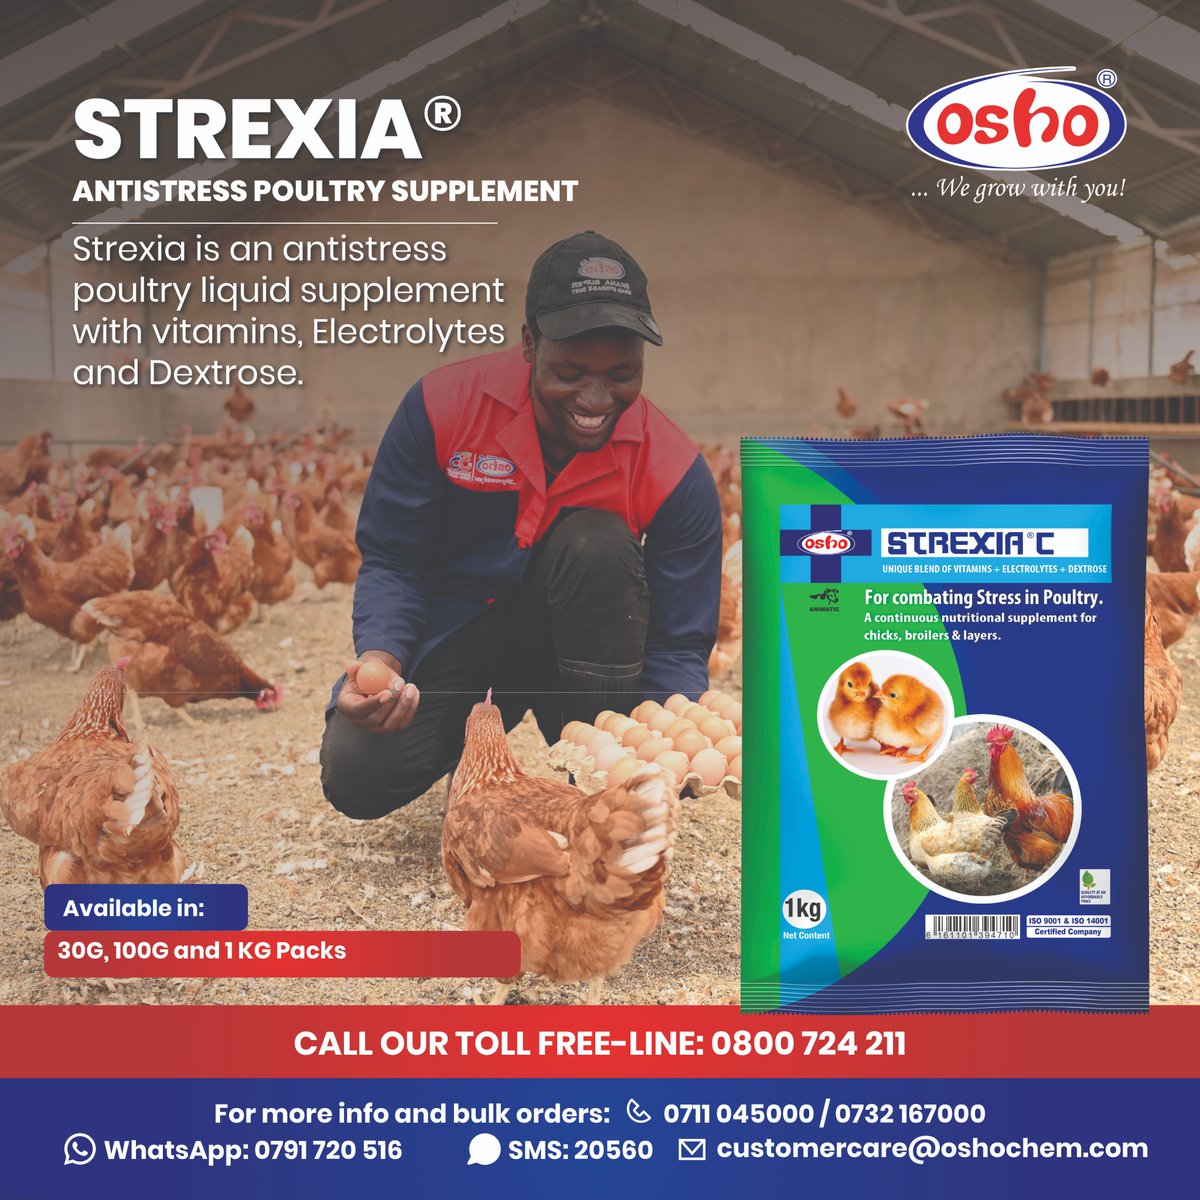 Say goodbye to stress in chicks, broilers & layers with our unique blend of vitamins, electrolytes & dextrose. Keep your poultry happy, healthy & thriving! Reach out via our toll-free line: 0800724211 or call 0711045000/0732167000 SMS at 20560 WhatsApp 0791720516. #wegrowwithyou